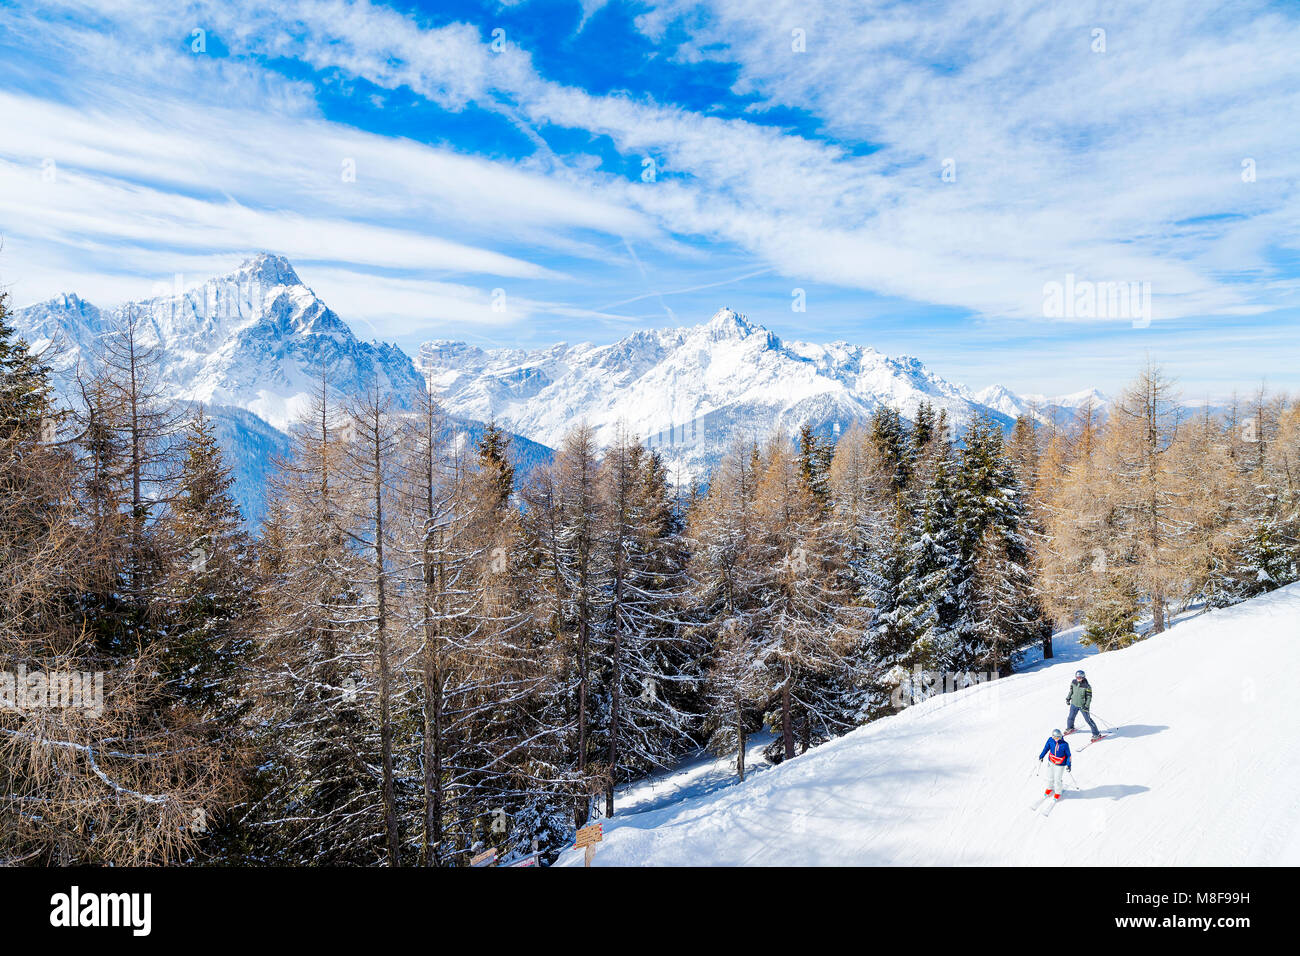 Skiing and snowboarding in high mountains, with Trentino Alto Adige's peaks in the background, San Candido. Italy Stock Photo